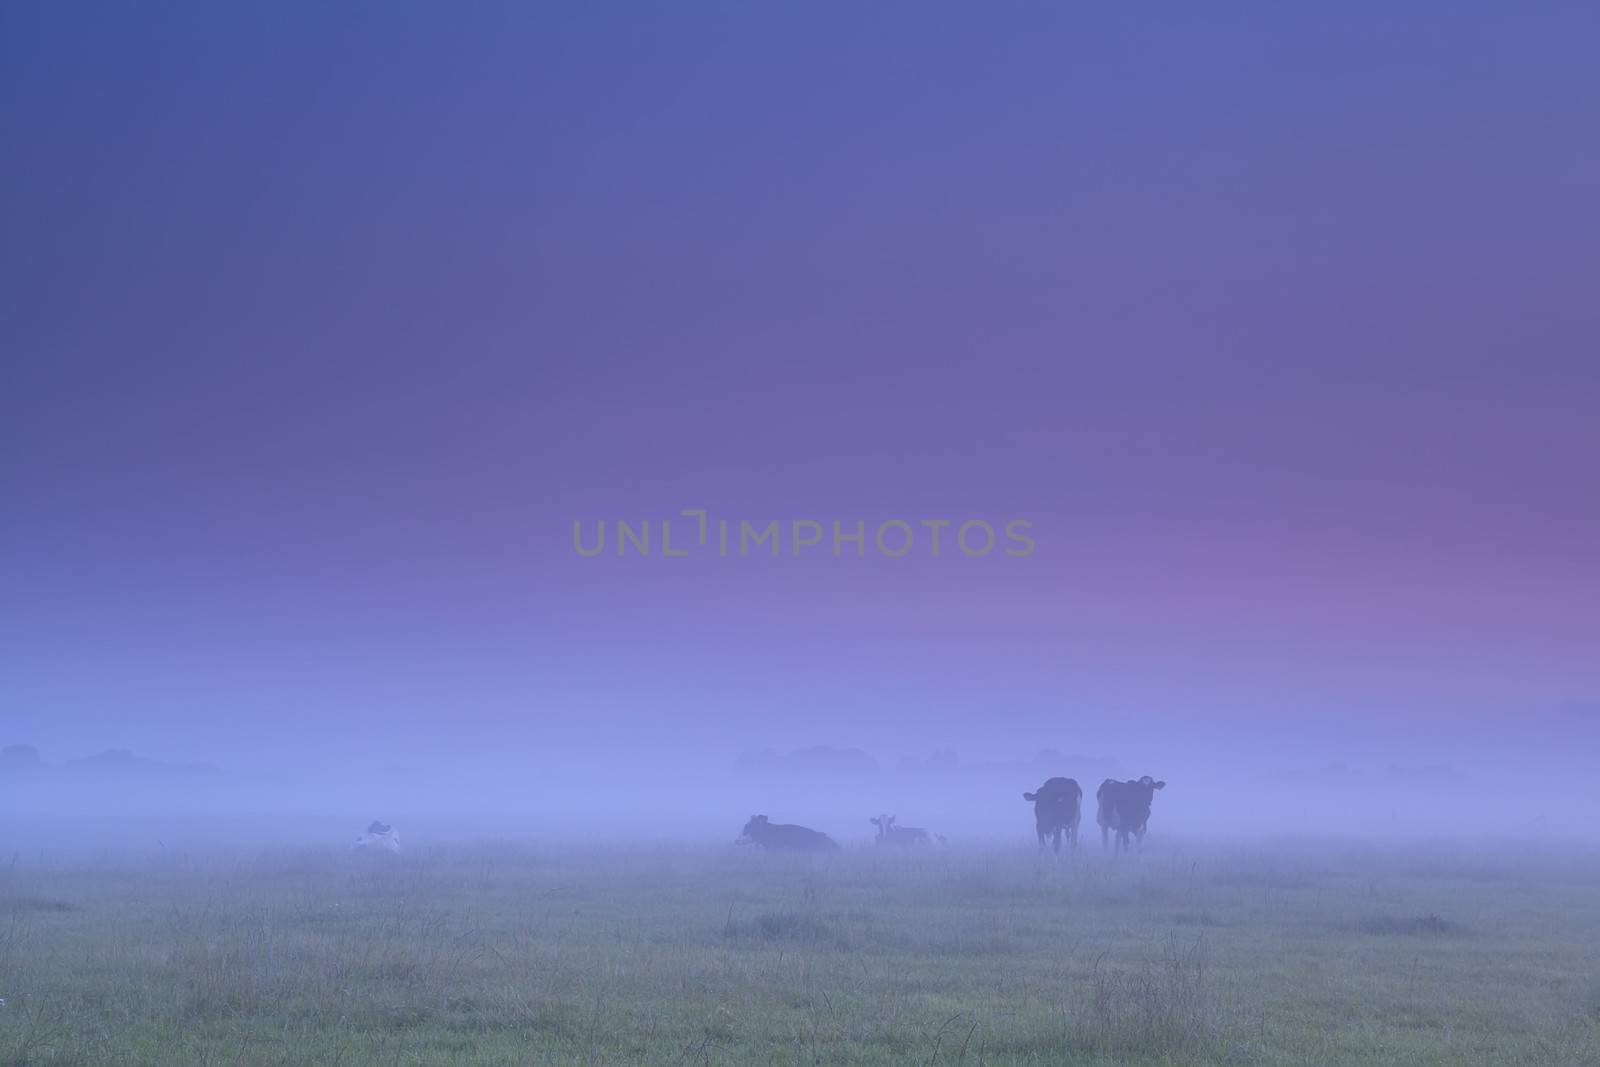 cows in dense fog on morning pasture during sunrise